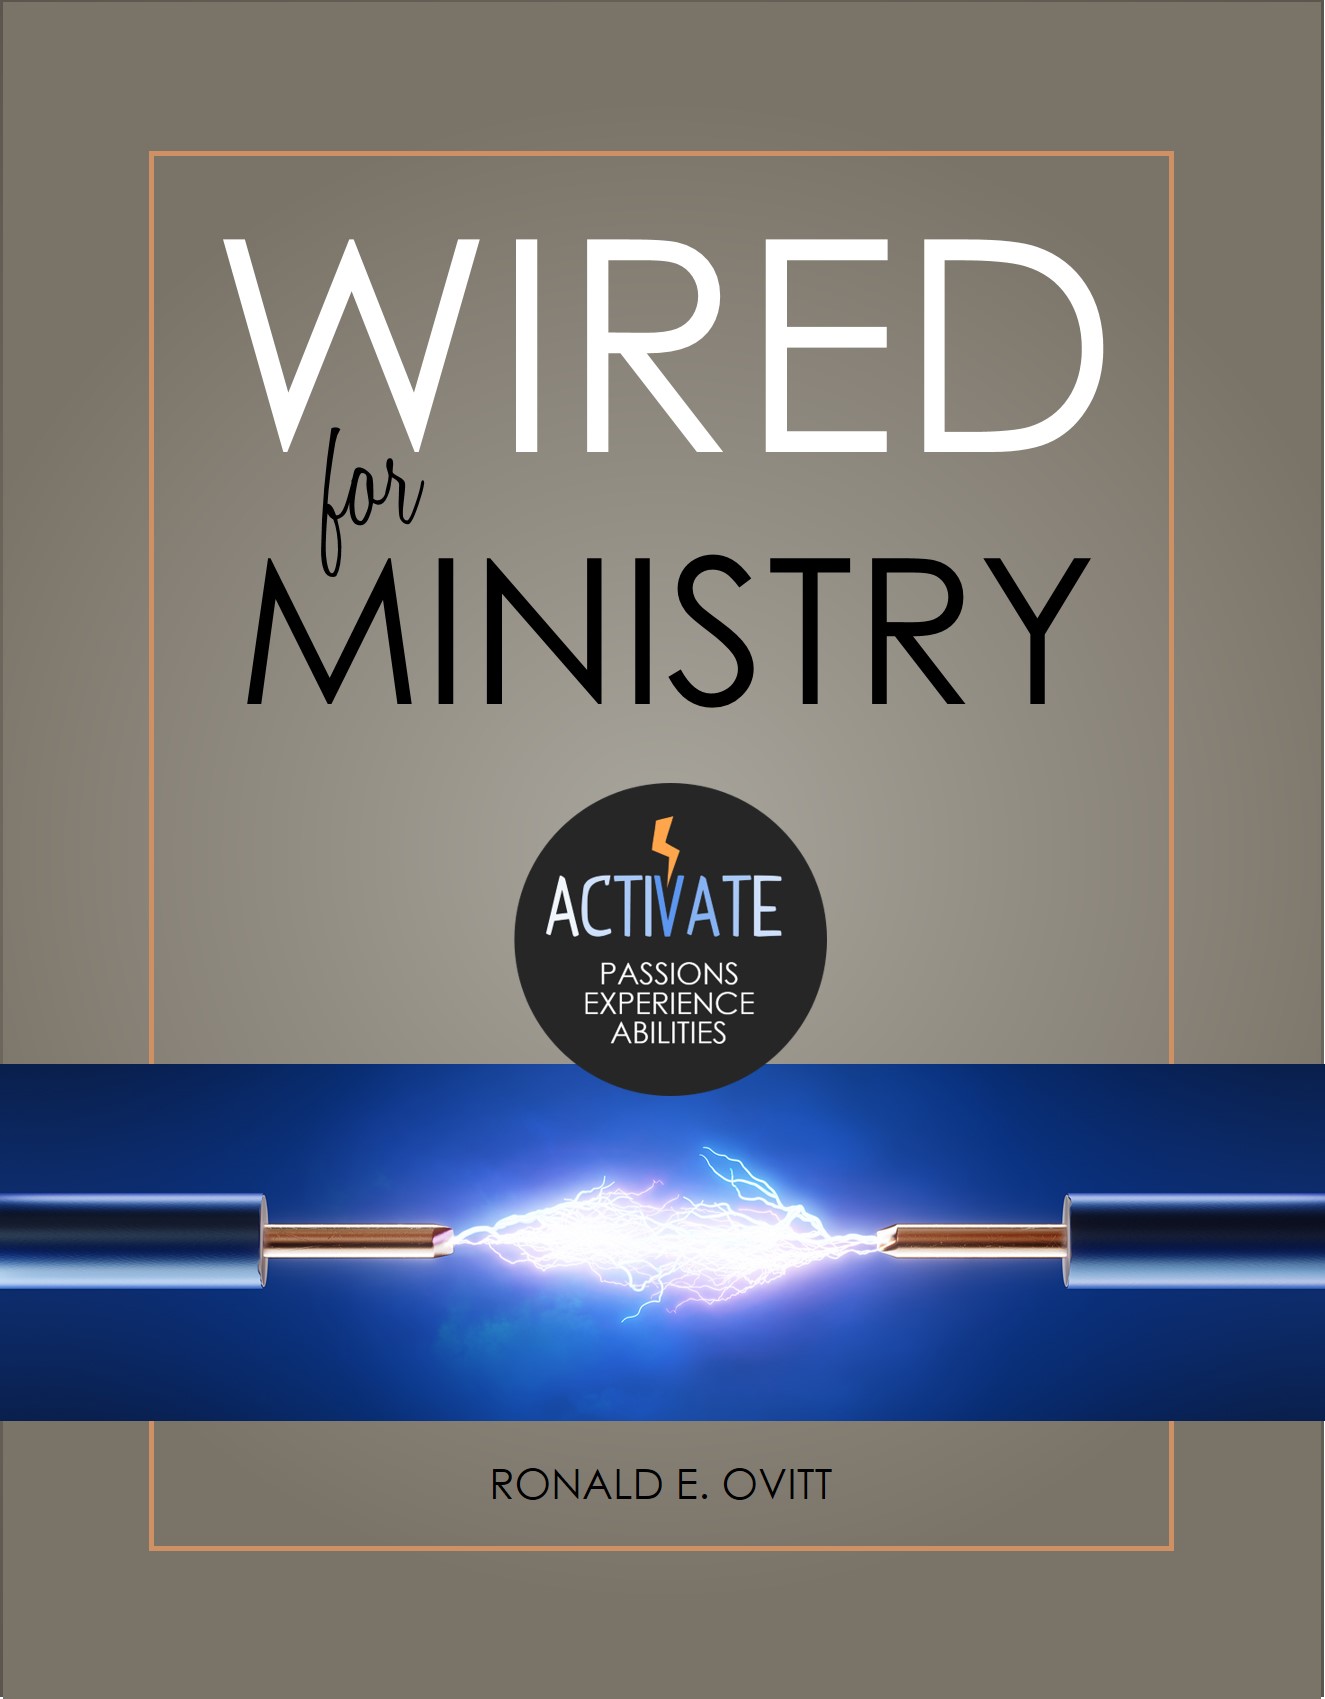 Cover of the "Wired for Ministry" book